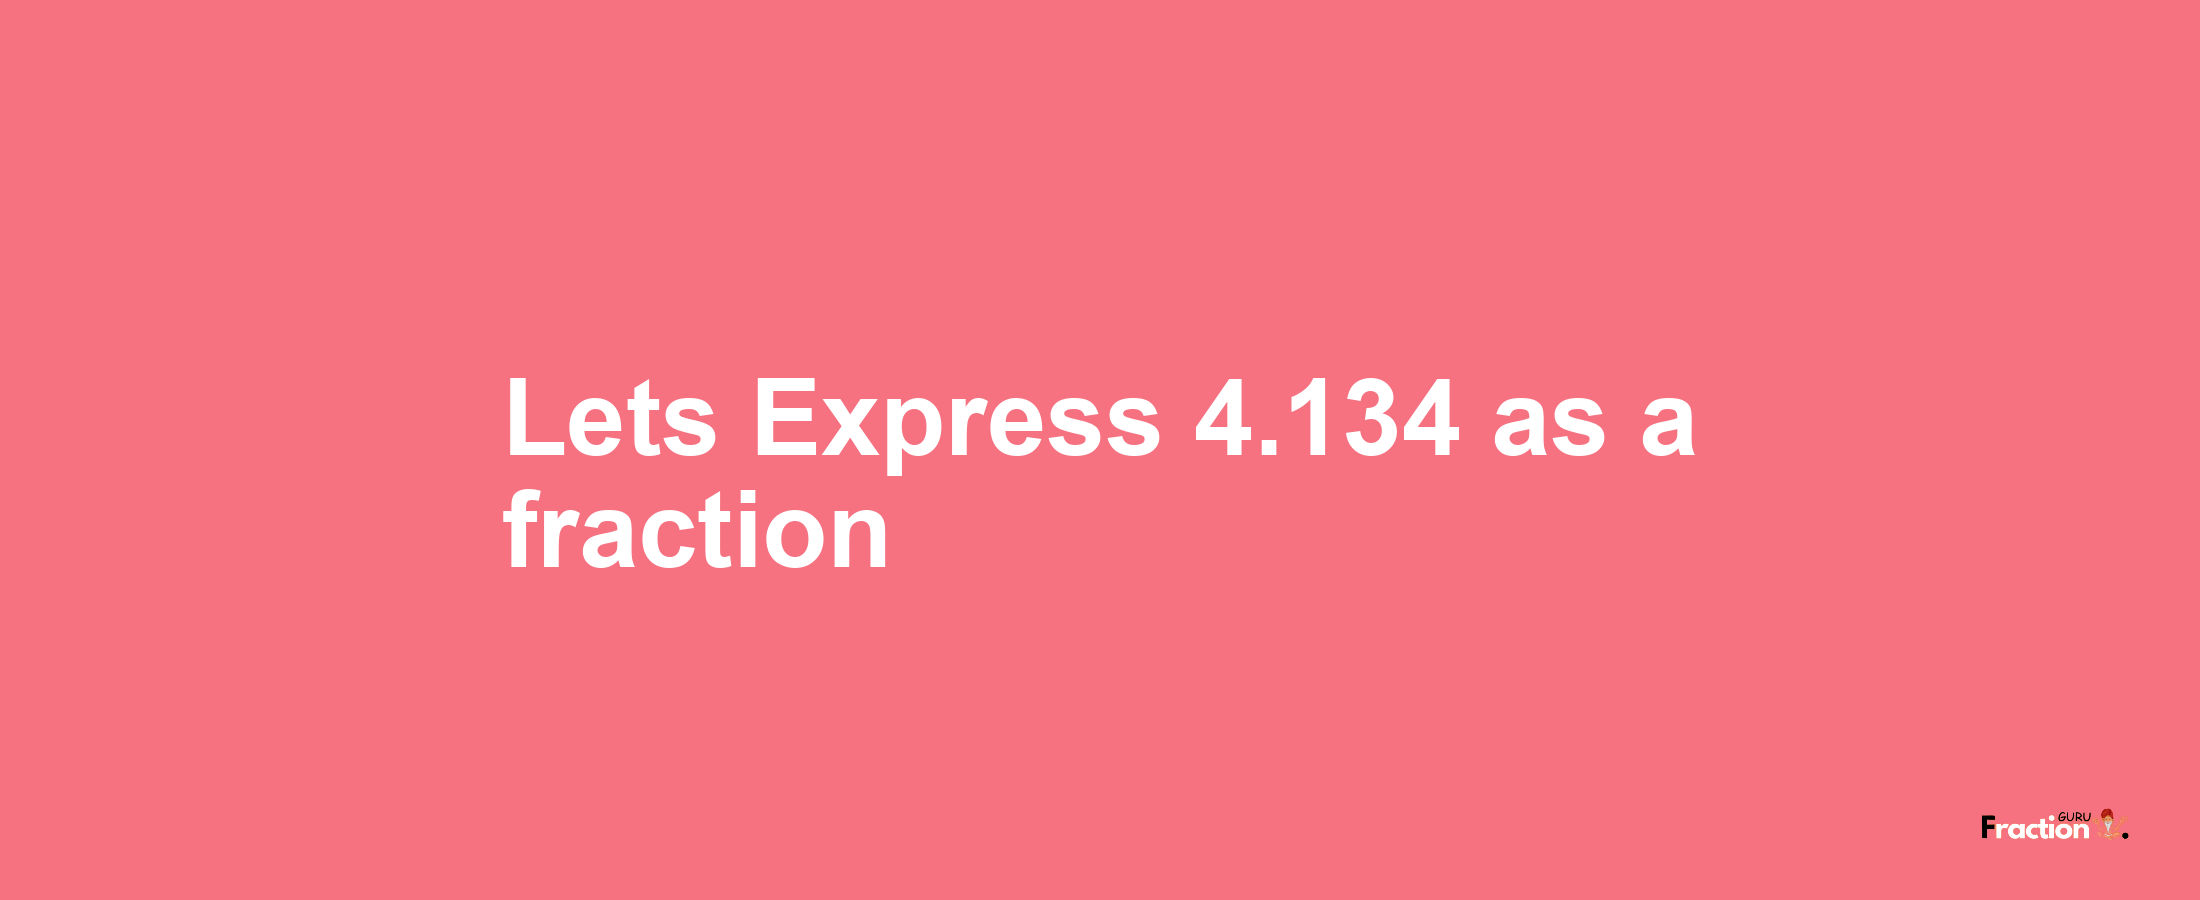 Lets Express 4.134 as afraction